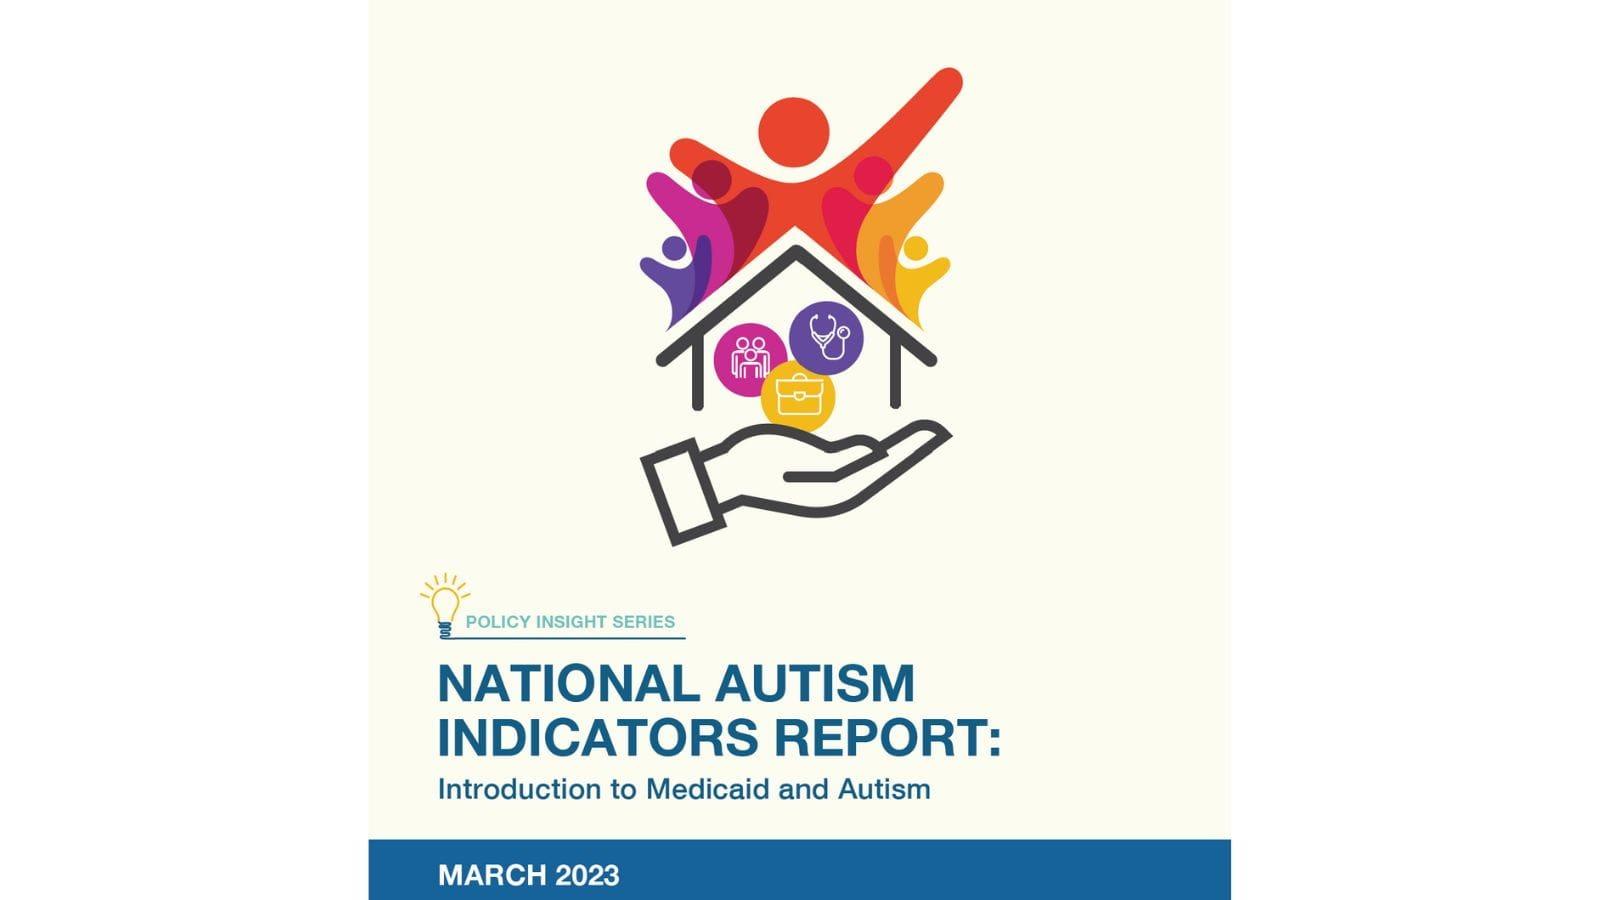 Logo for National Autism Indicators Report - Introduction to Medicaid and Autism